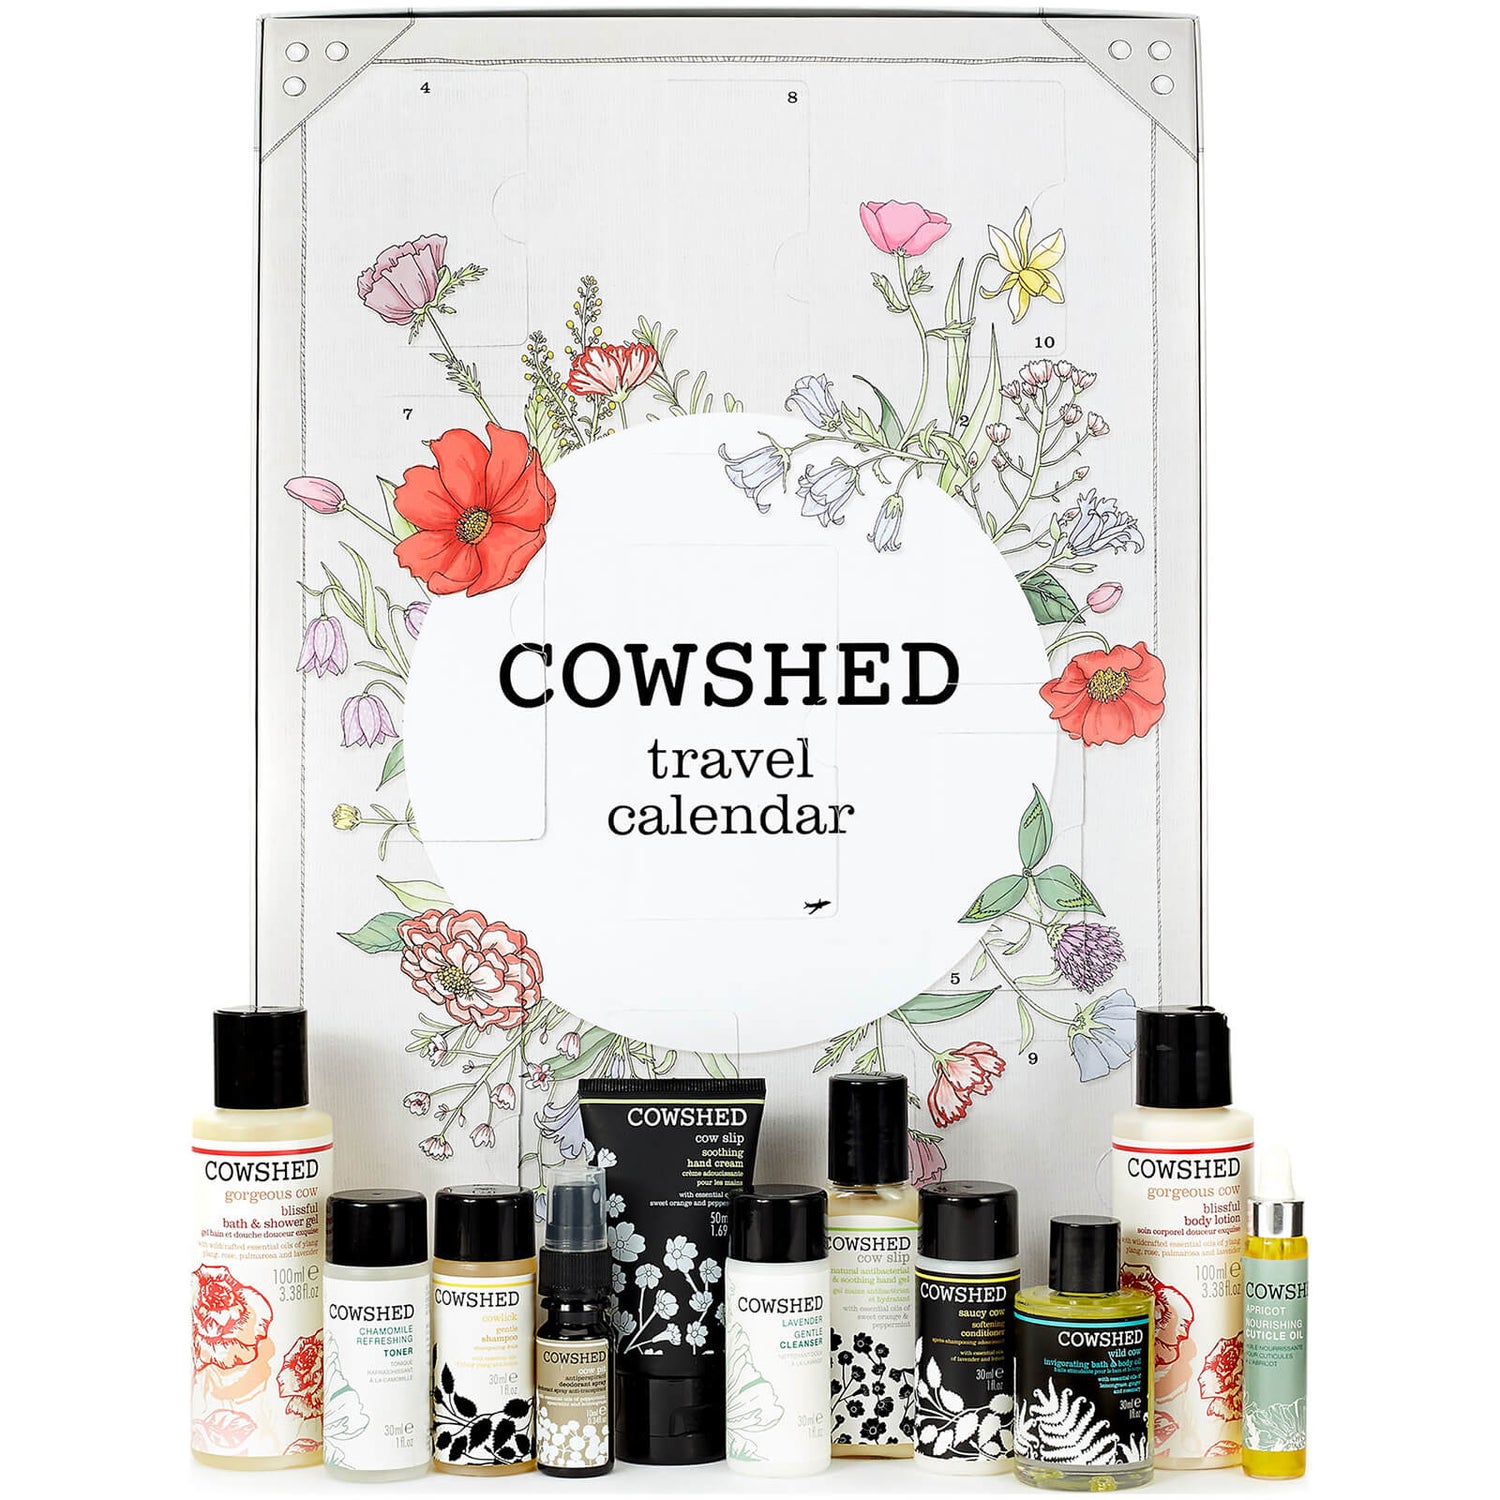 Cowshed Countdown Calendar (Worth £115)